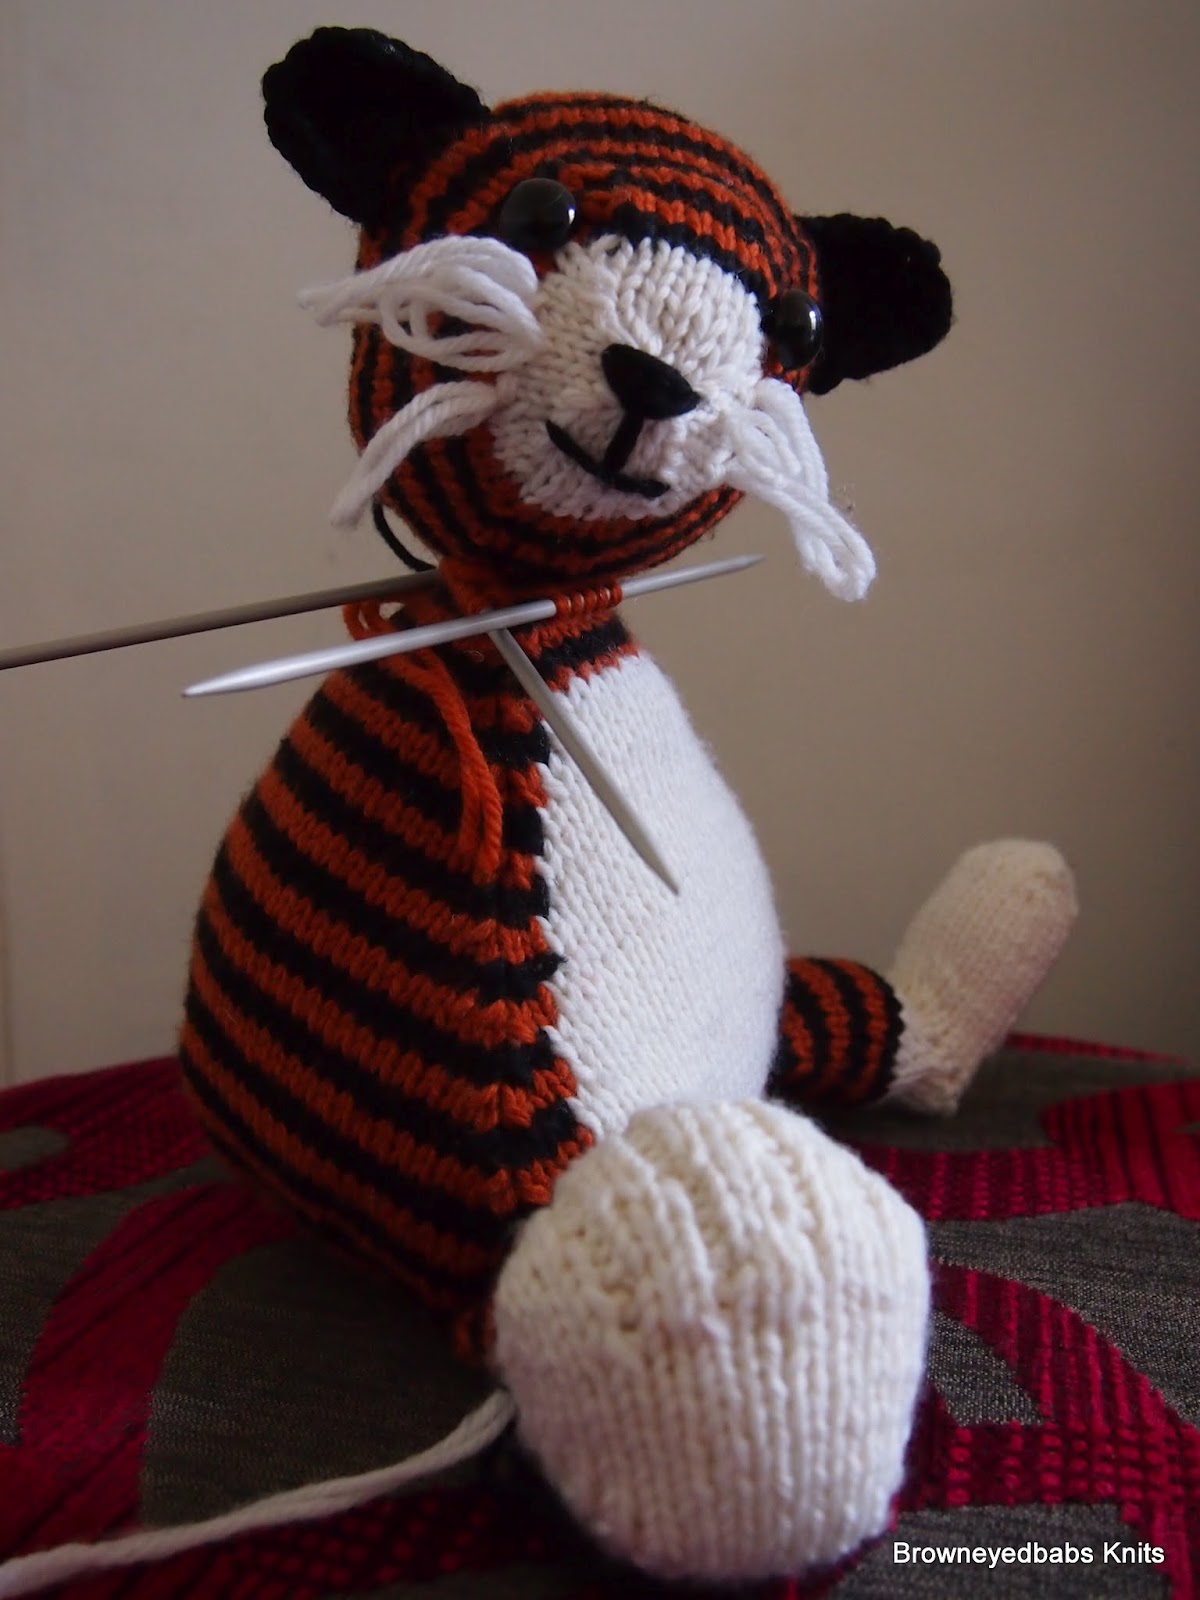 browneyedbabs knitting patterns: the naughty tiger